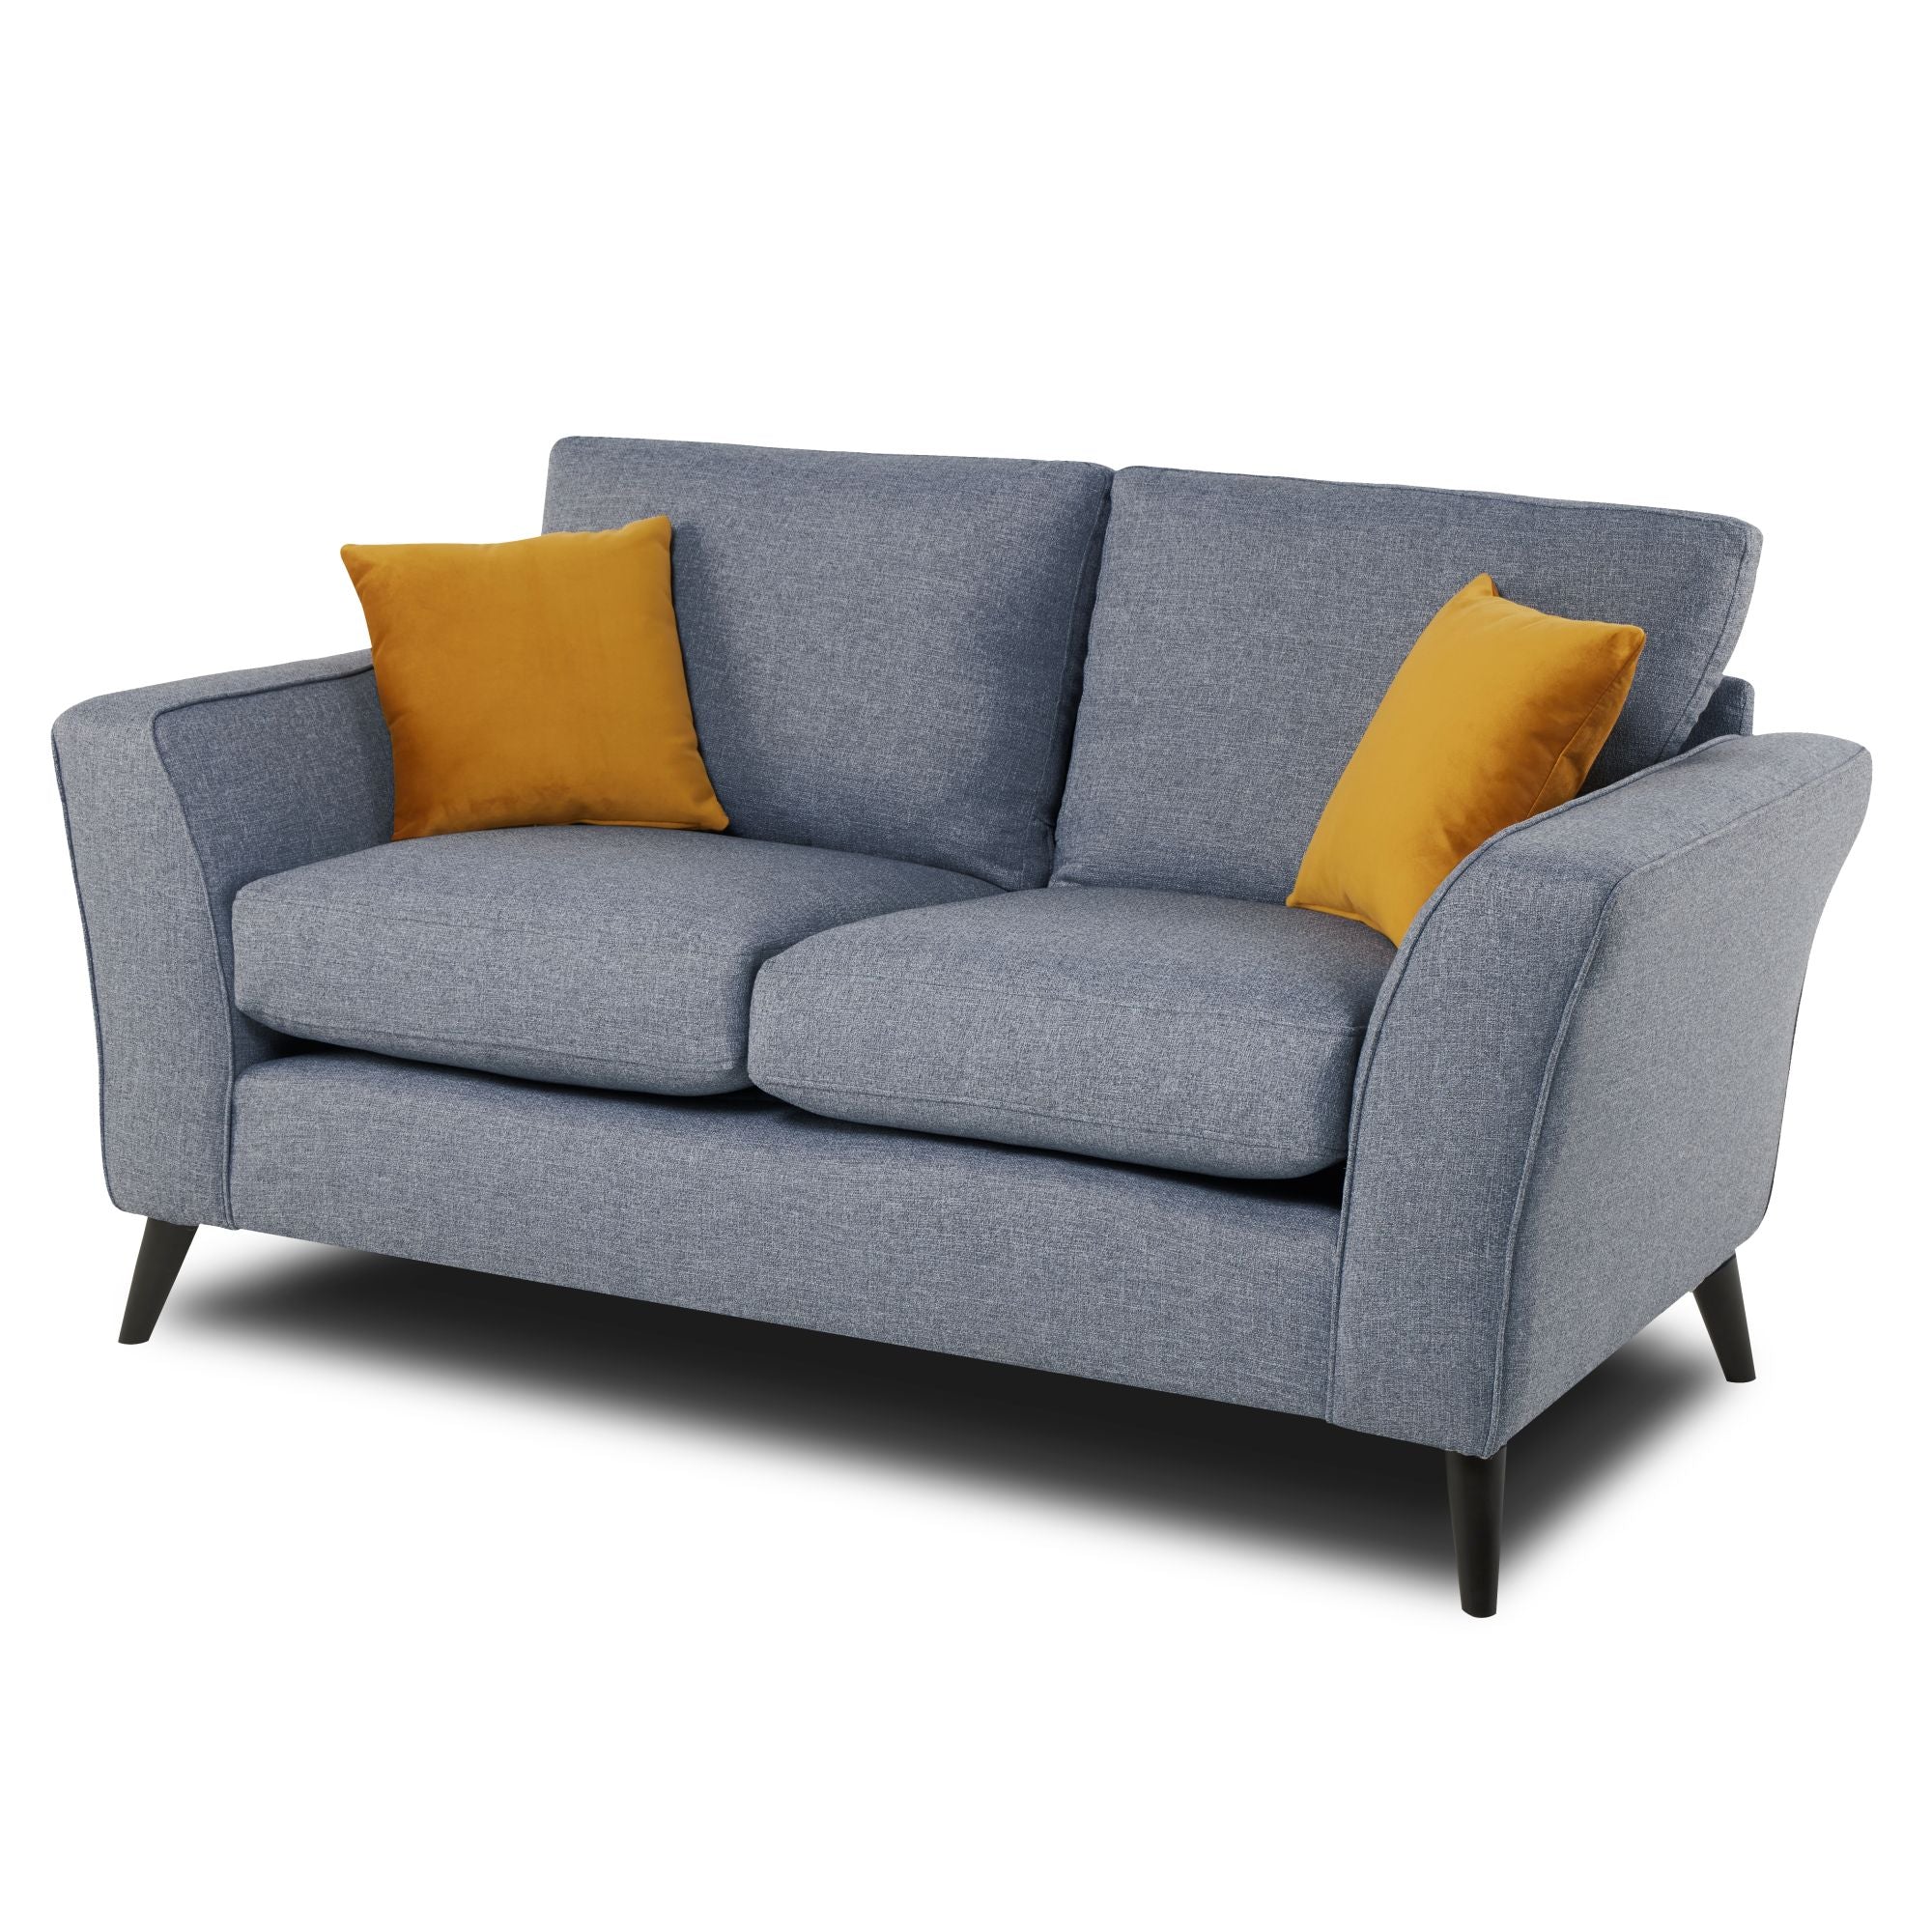 Libby 2 seater in colour denim on an angle with white background 